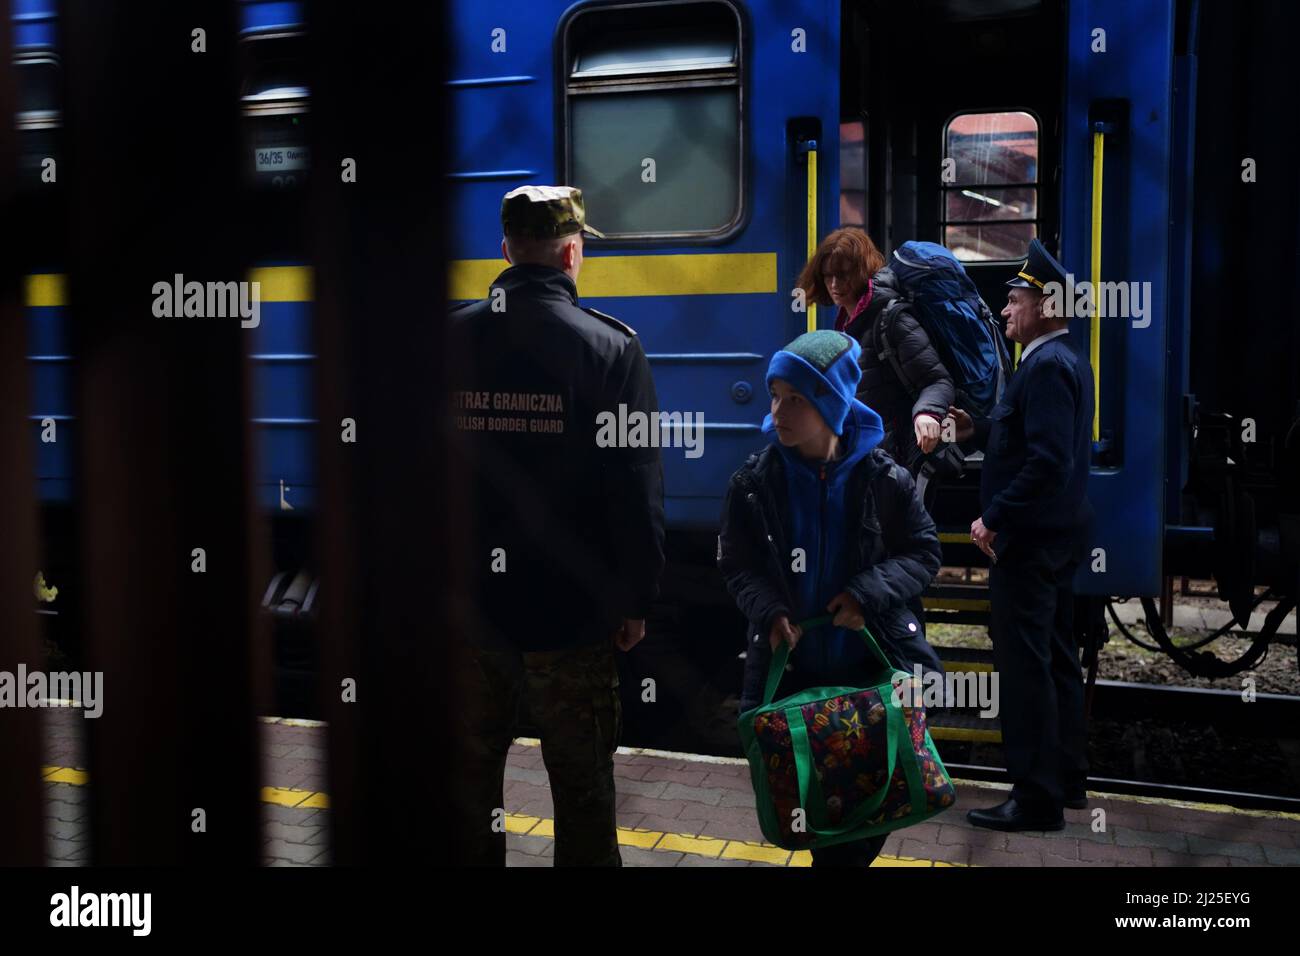 A Ukrainian family disembark a train at Przemysl Glowny train station in Poland, after arriving by train from Ukraine to flee the Russian invasion. Picture date: Tuesday March 29, 2022. Stock Photo